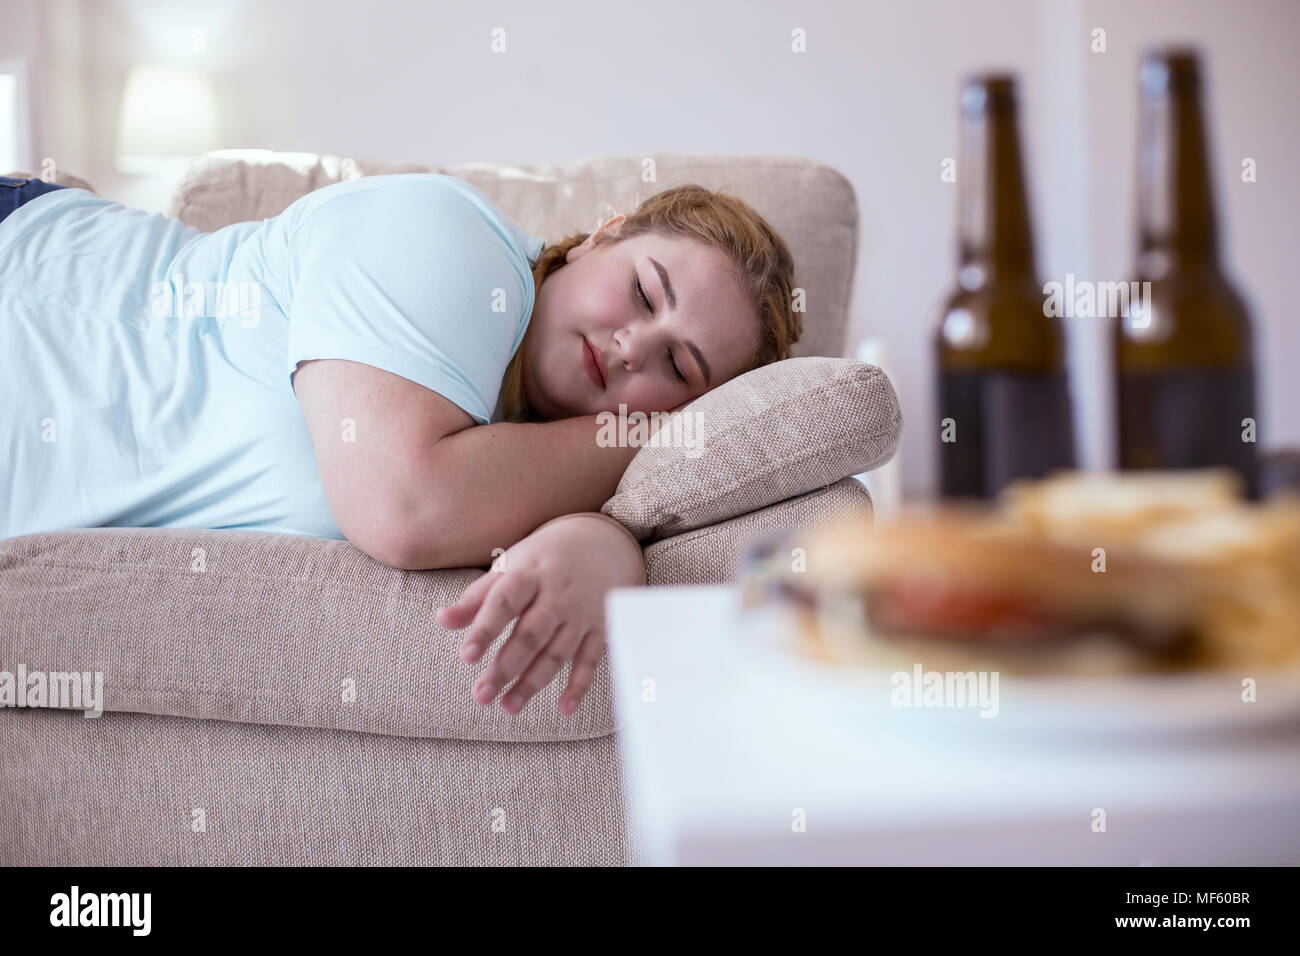 Lazy plump woman sleeping on the couch Stock Photo